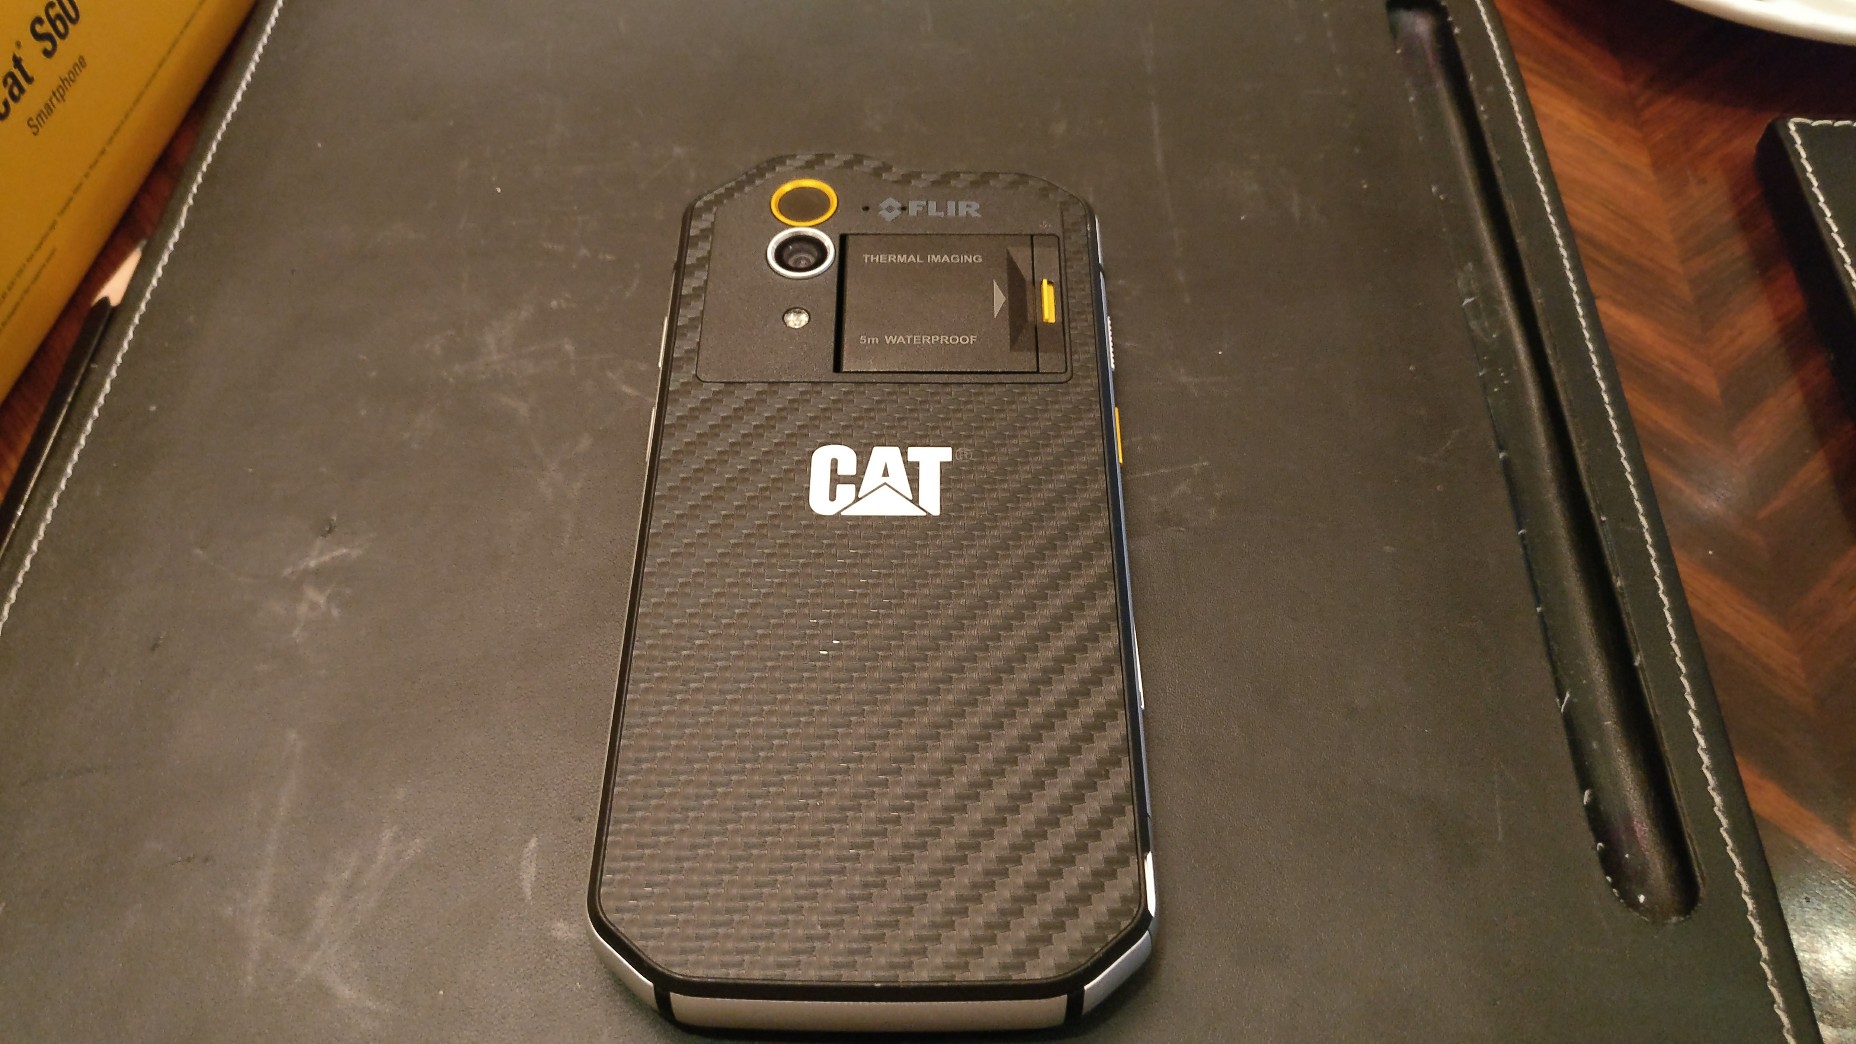 World's first Thermal Image Scanning smartphone 'CAT S60' to launch in India soon